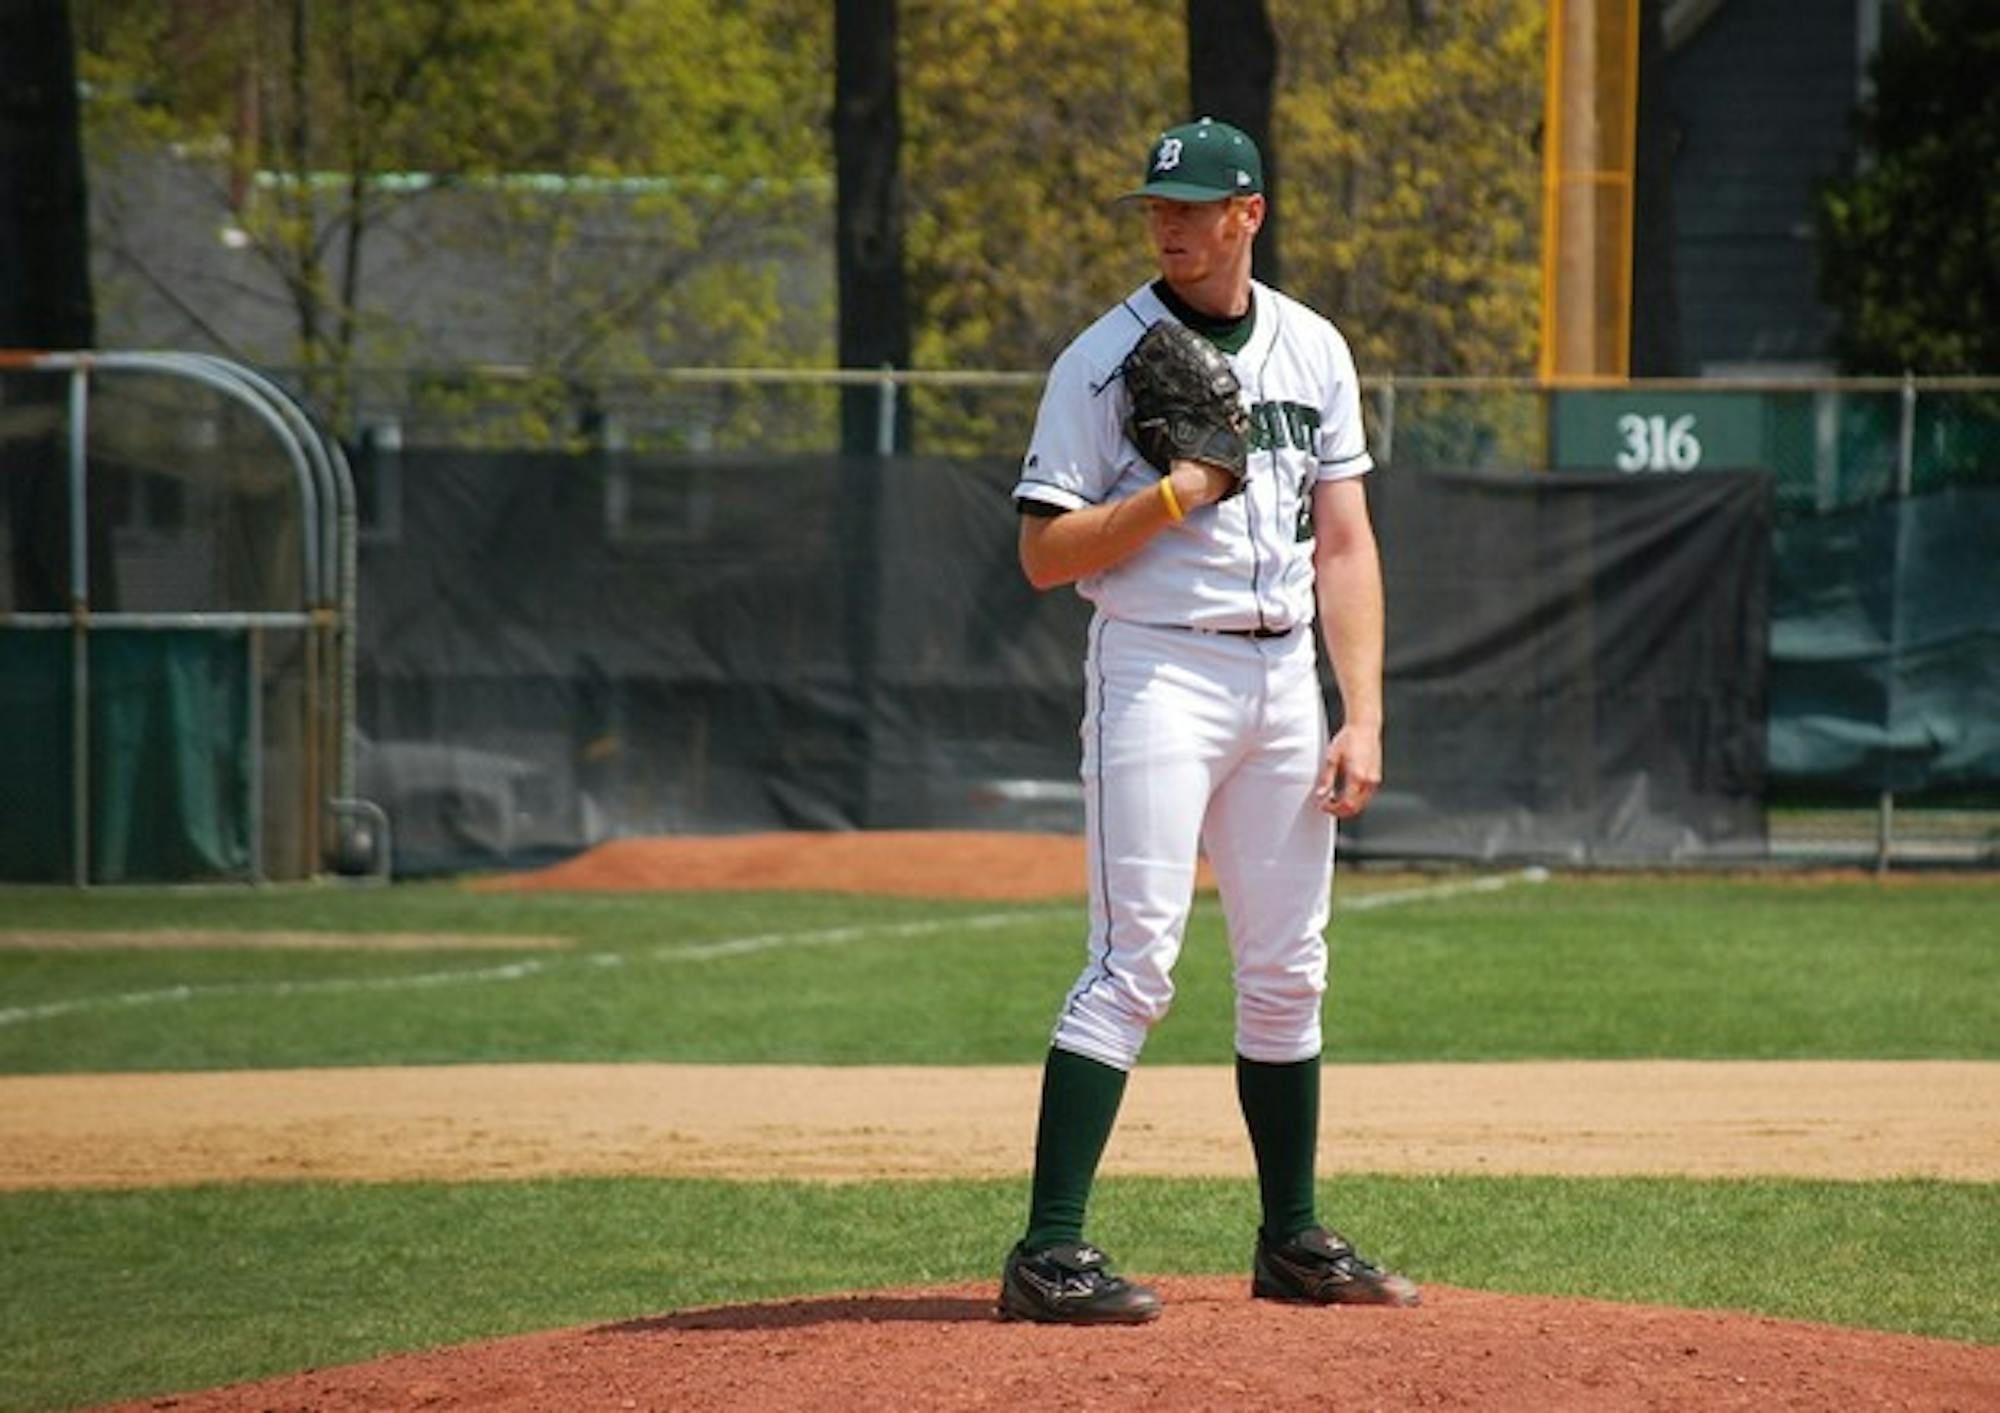 Russell Young '08 compiled a 3.16 earned run average and 27 strikeouts in 37 innings of Ivy League play.